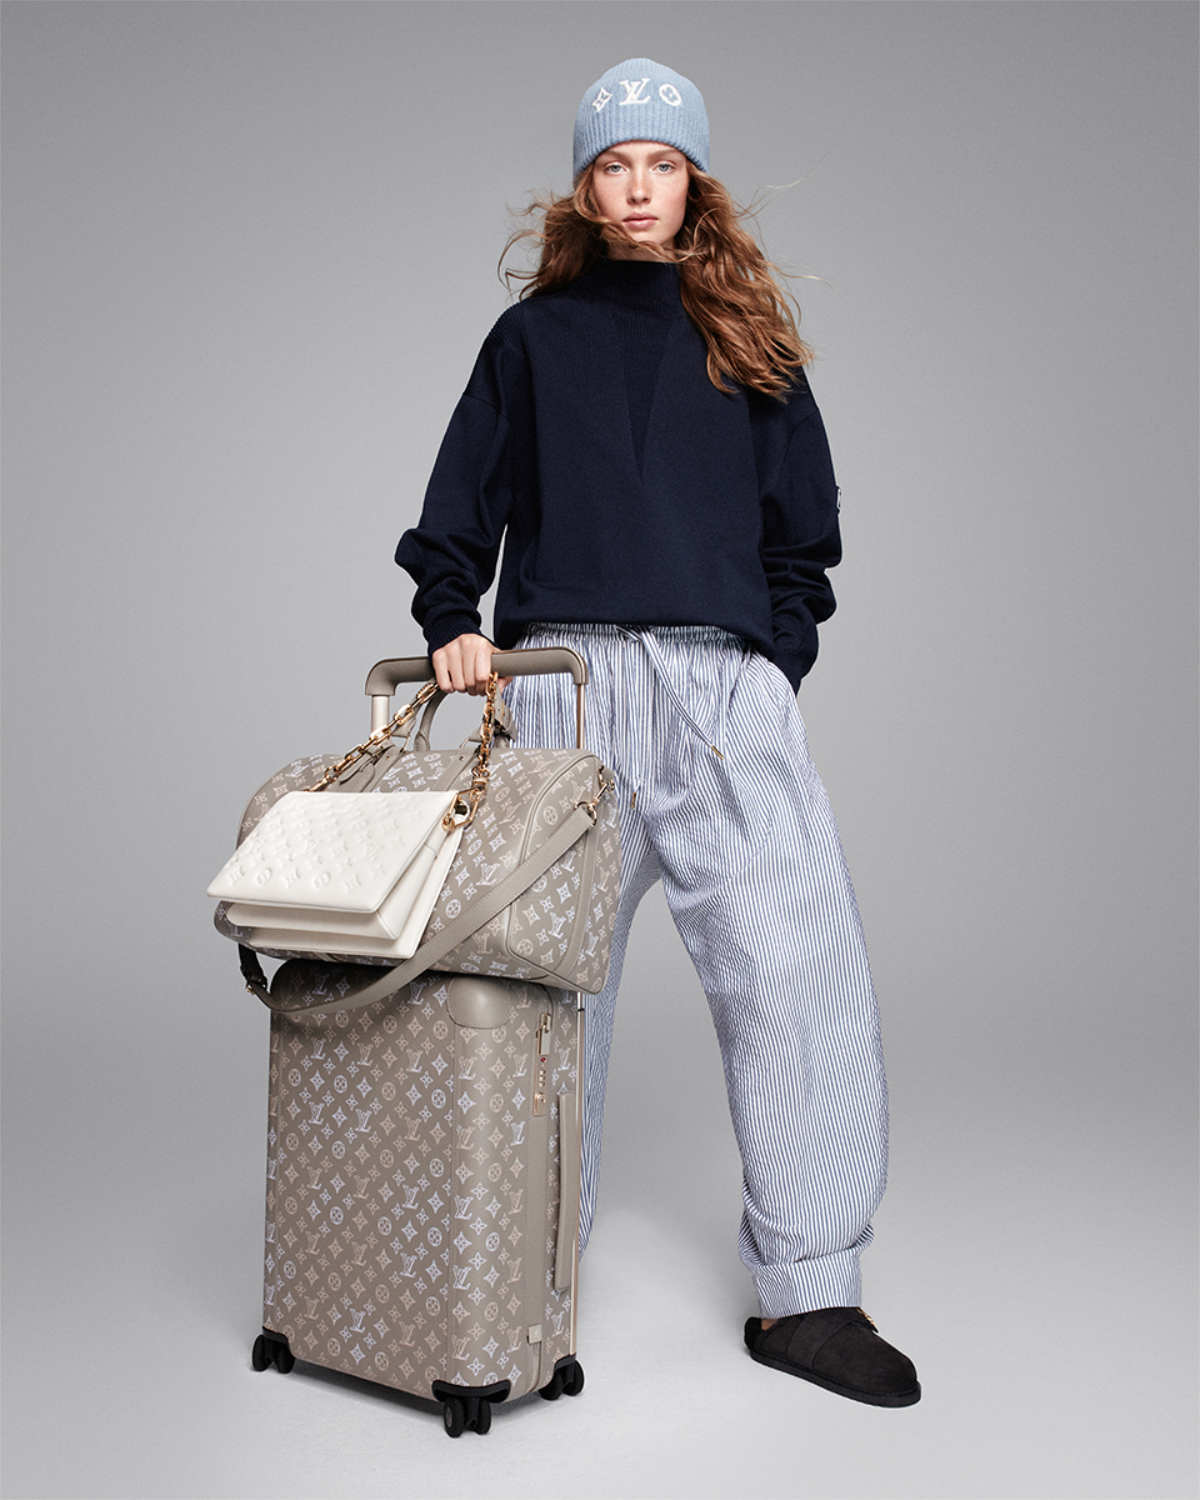 Louis Vuitton Introduces Its New Flight Mode Capsule Collection